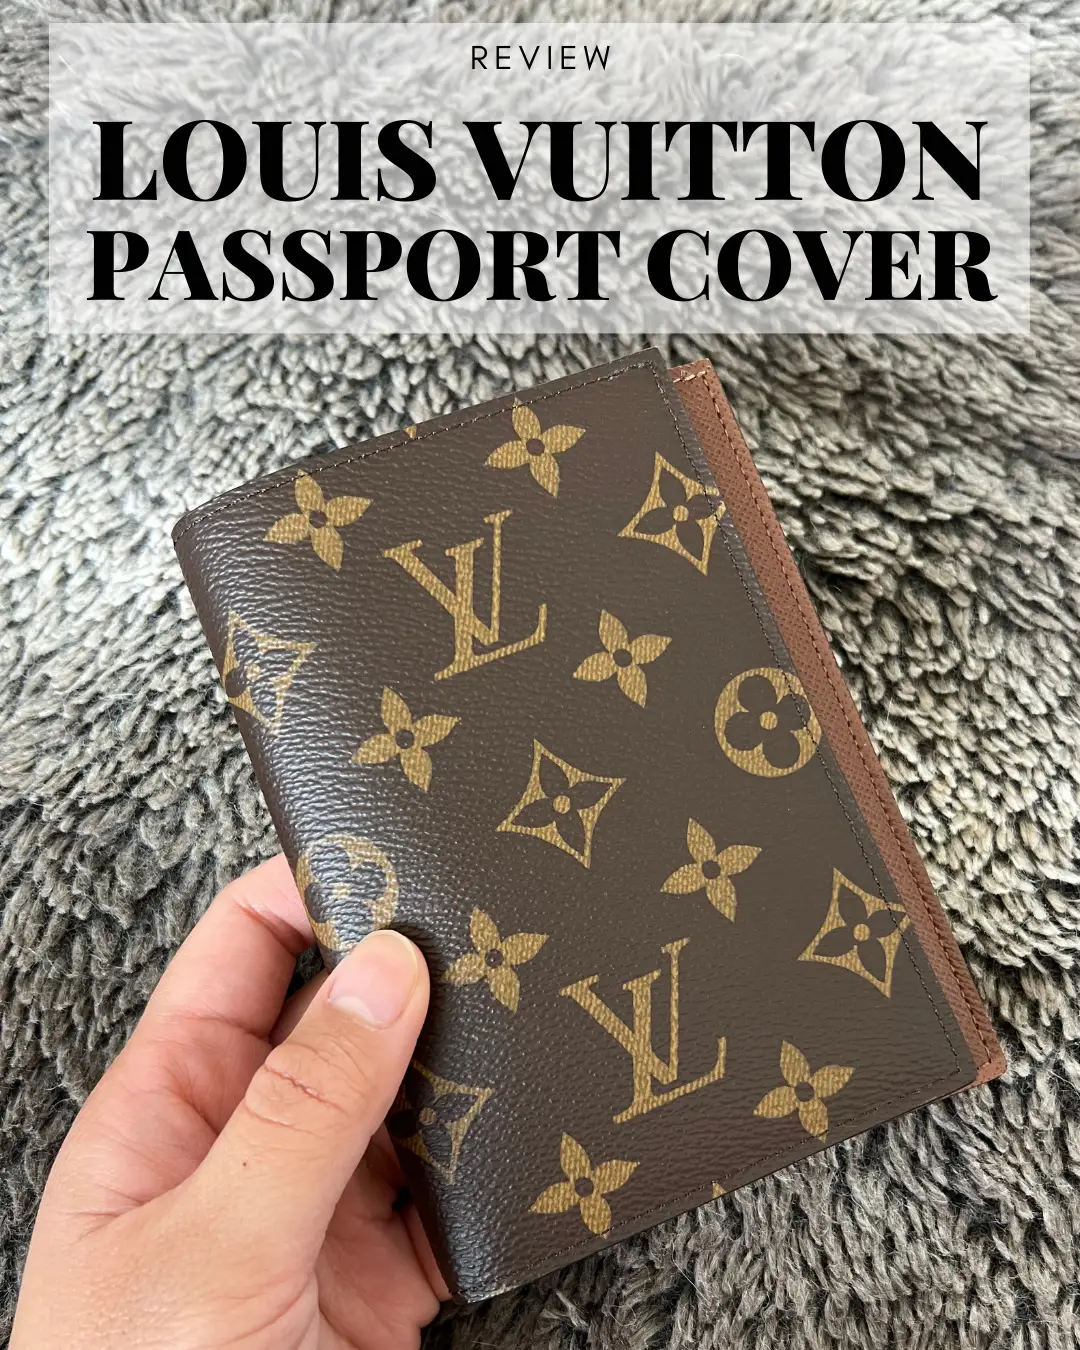 THIS LV PIECE MAKES TRAVELING SO MUCH MORE SPECIAL, Gallery posted by  michelleorgeta